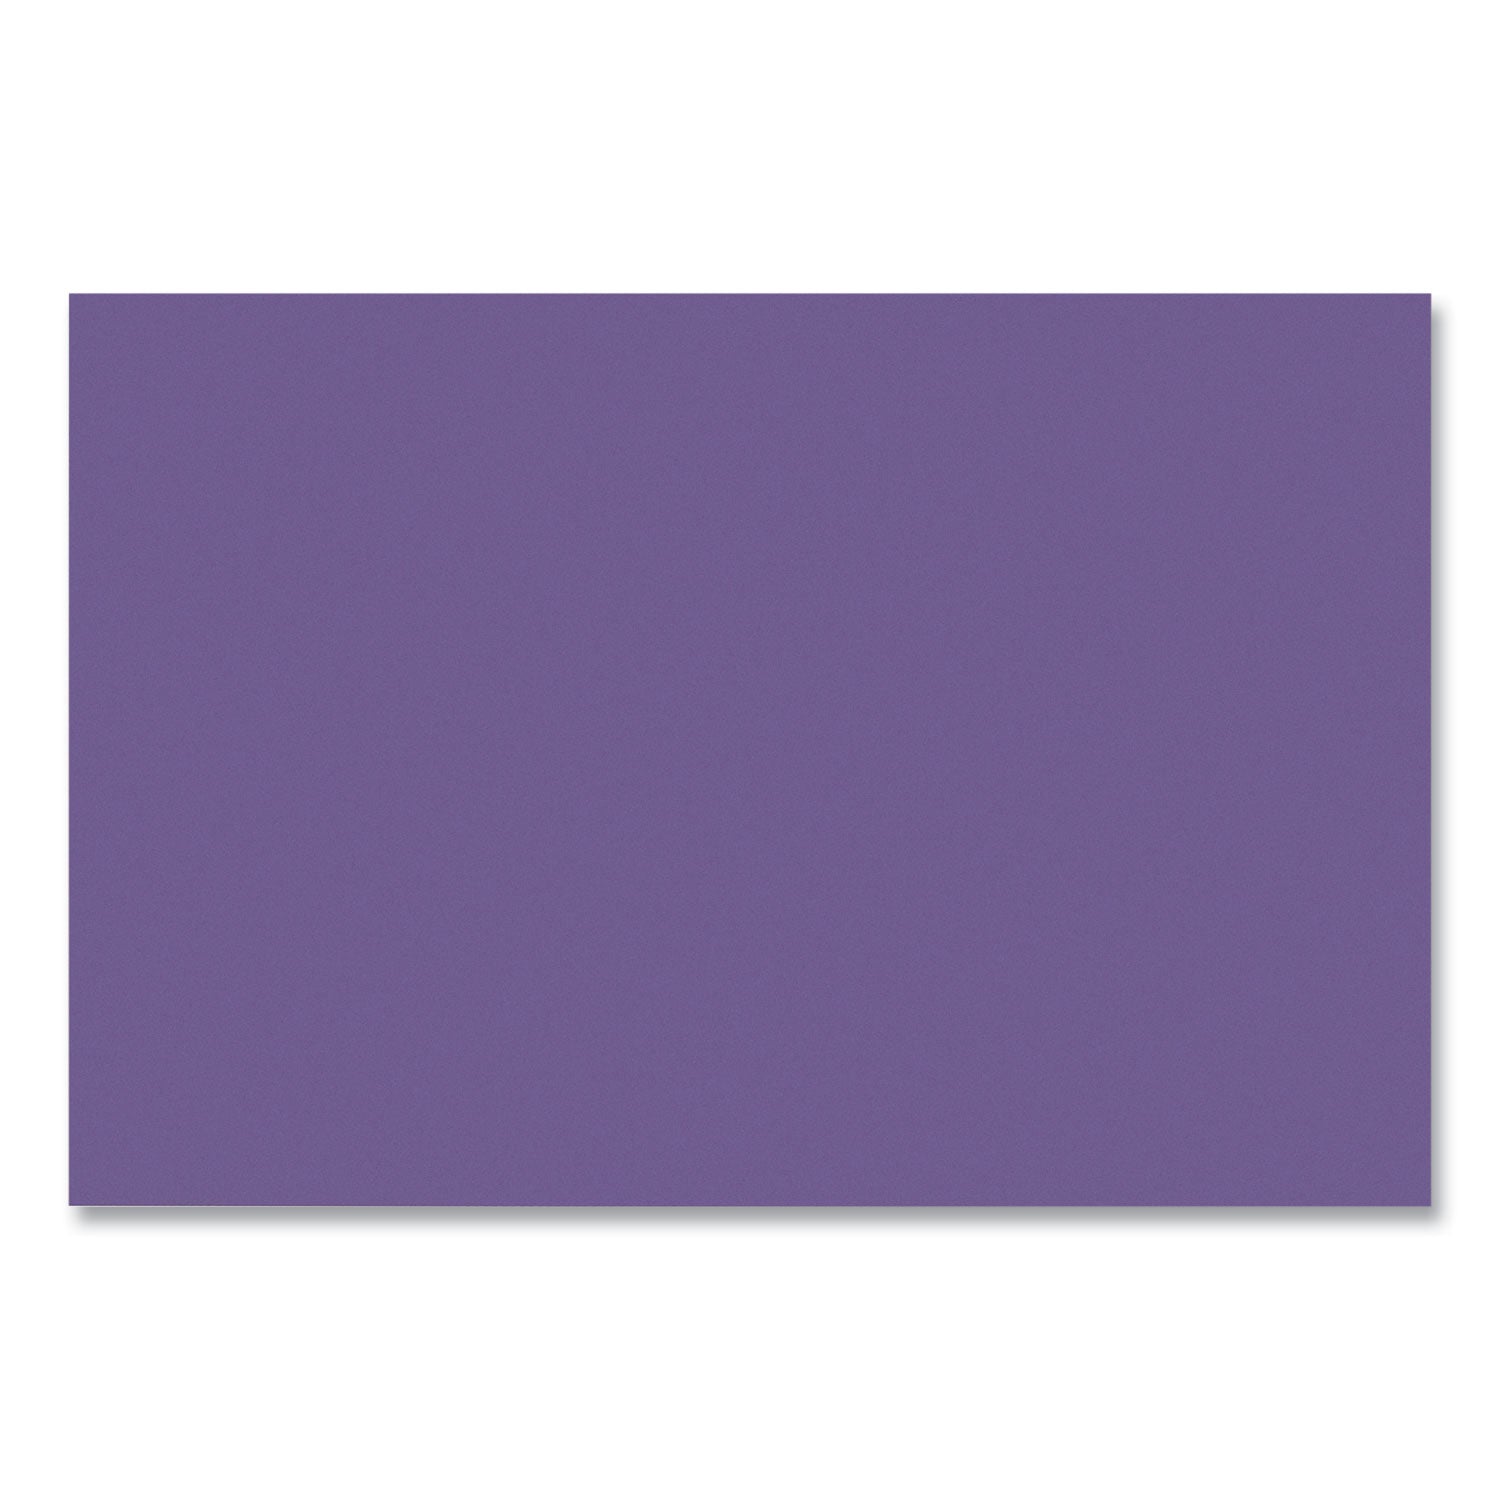 SunWorks Construction Paper, 50 lb Text Weight, 12 x 18, Violet, 50/Pack - 